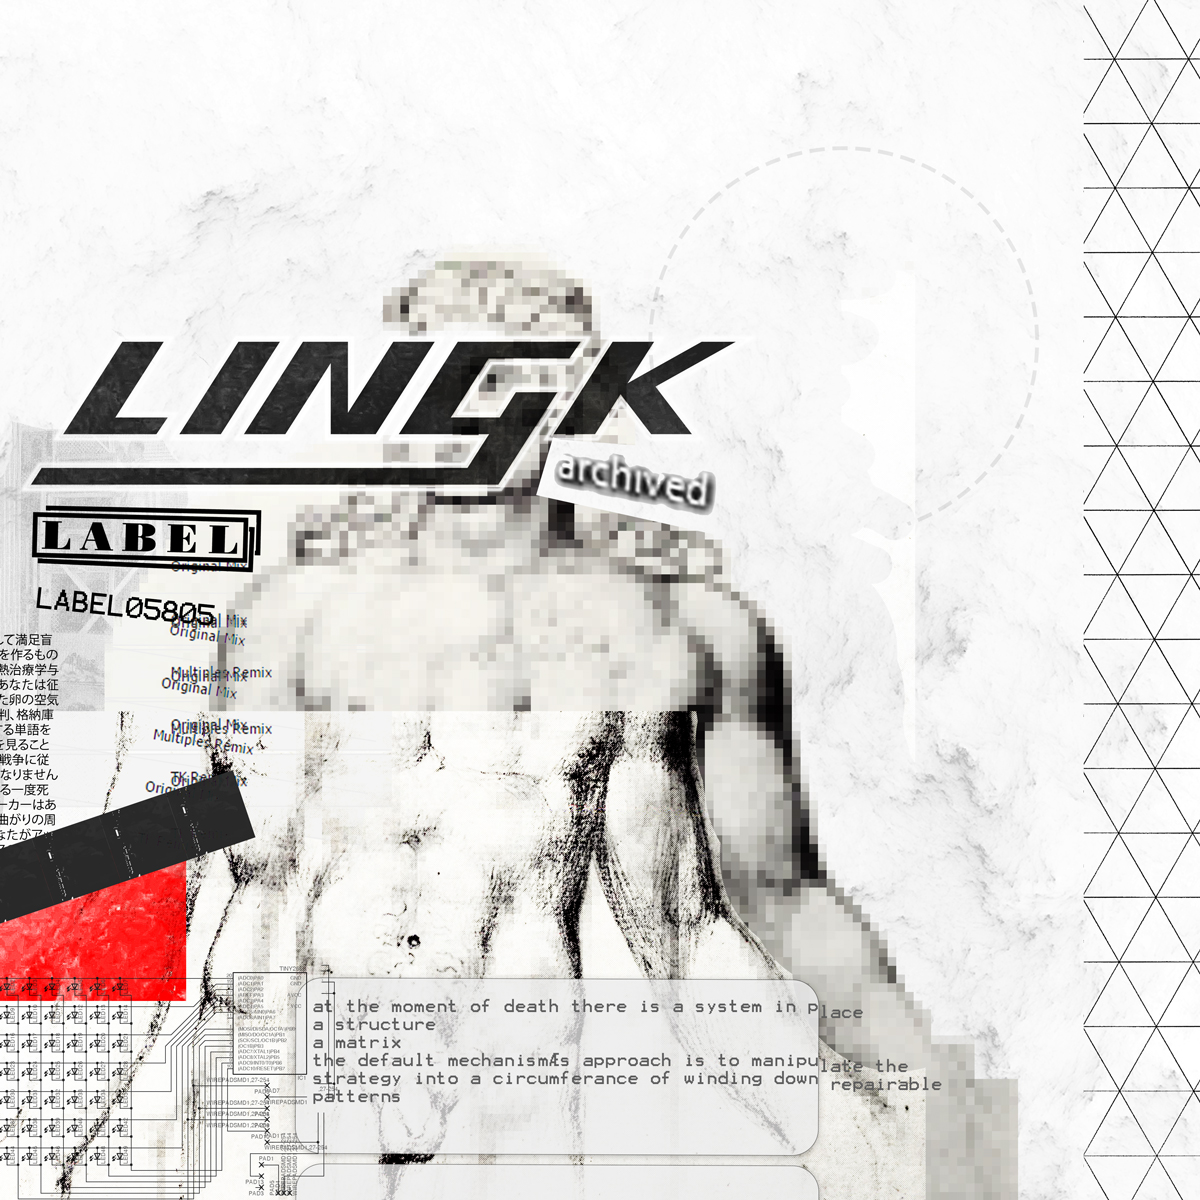 Detroit ‘Label’ Latest Release from Lingk